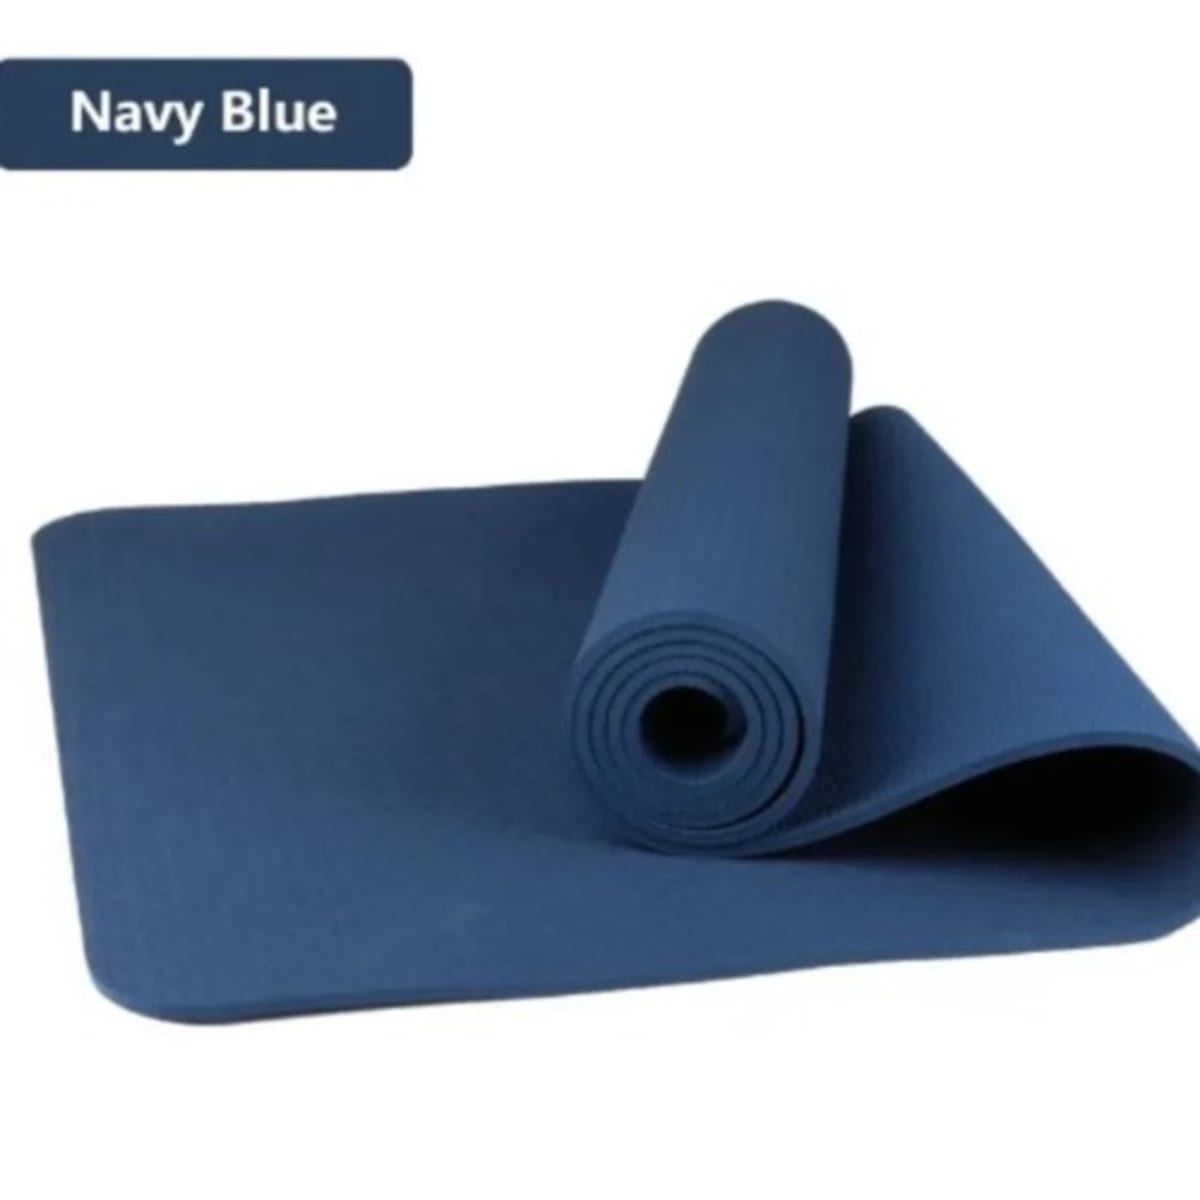 Yoga Mat With Carrier Bag- Navy Blue